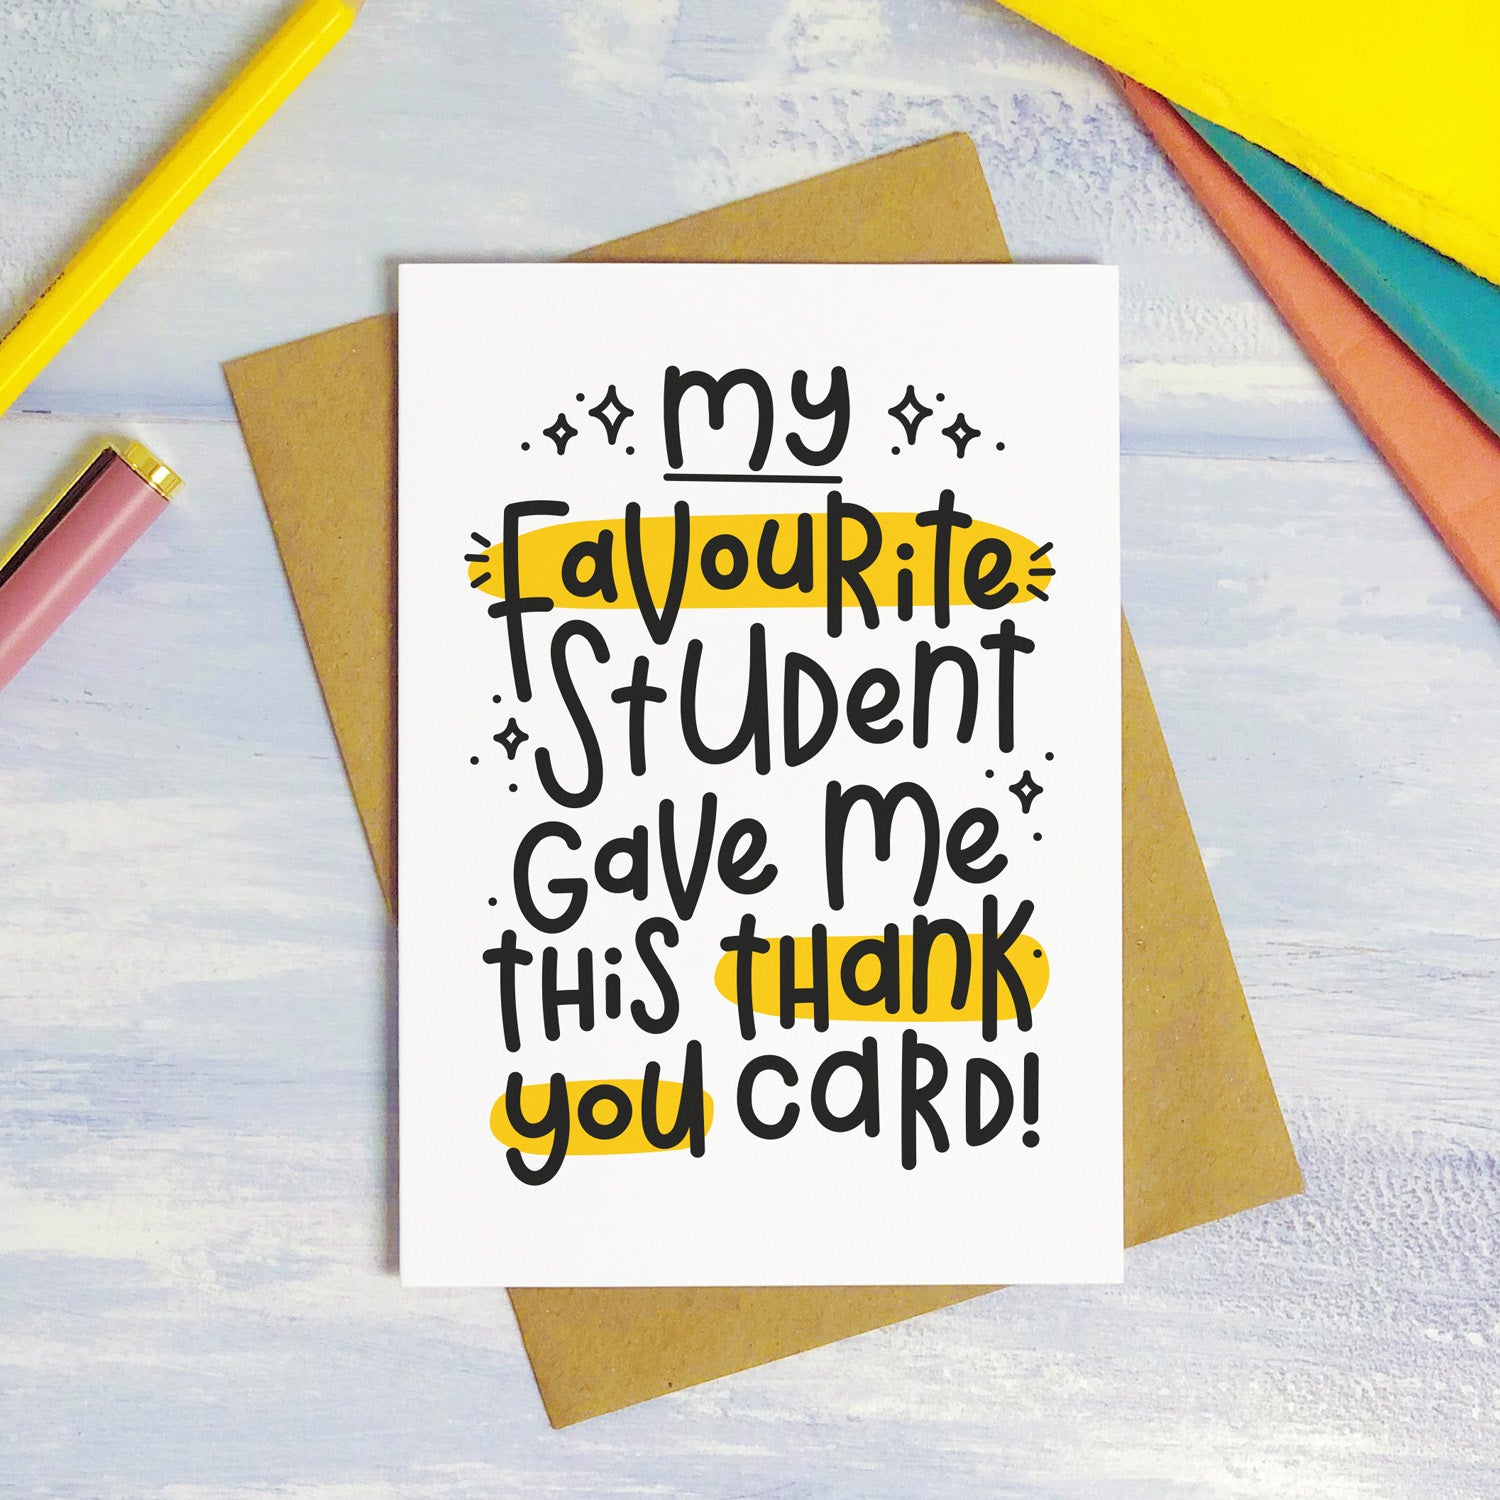 A favourite student thank you teacher card photographed on a purple surface with colourful text books in the background. The card reads "my favourite student gave me this thank you card!"